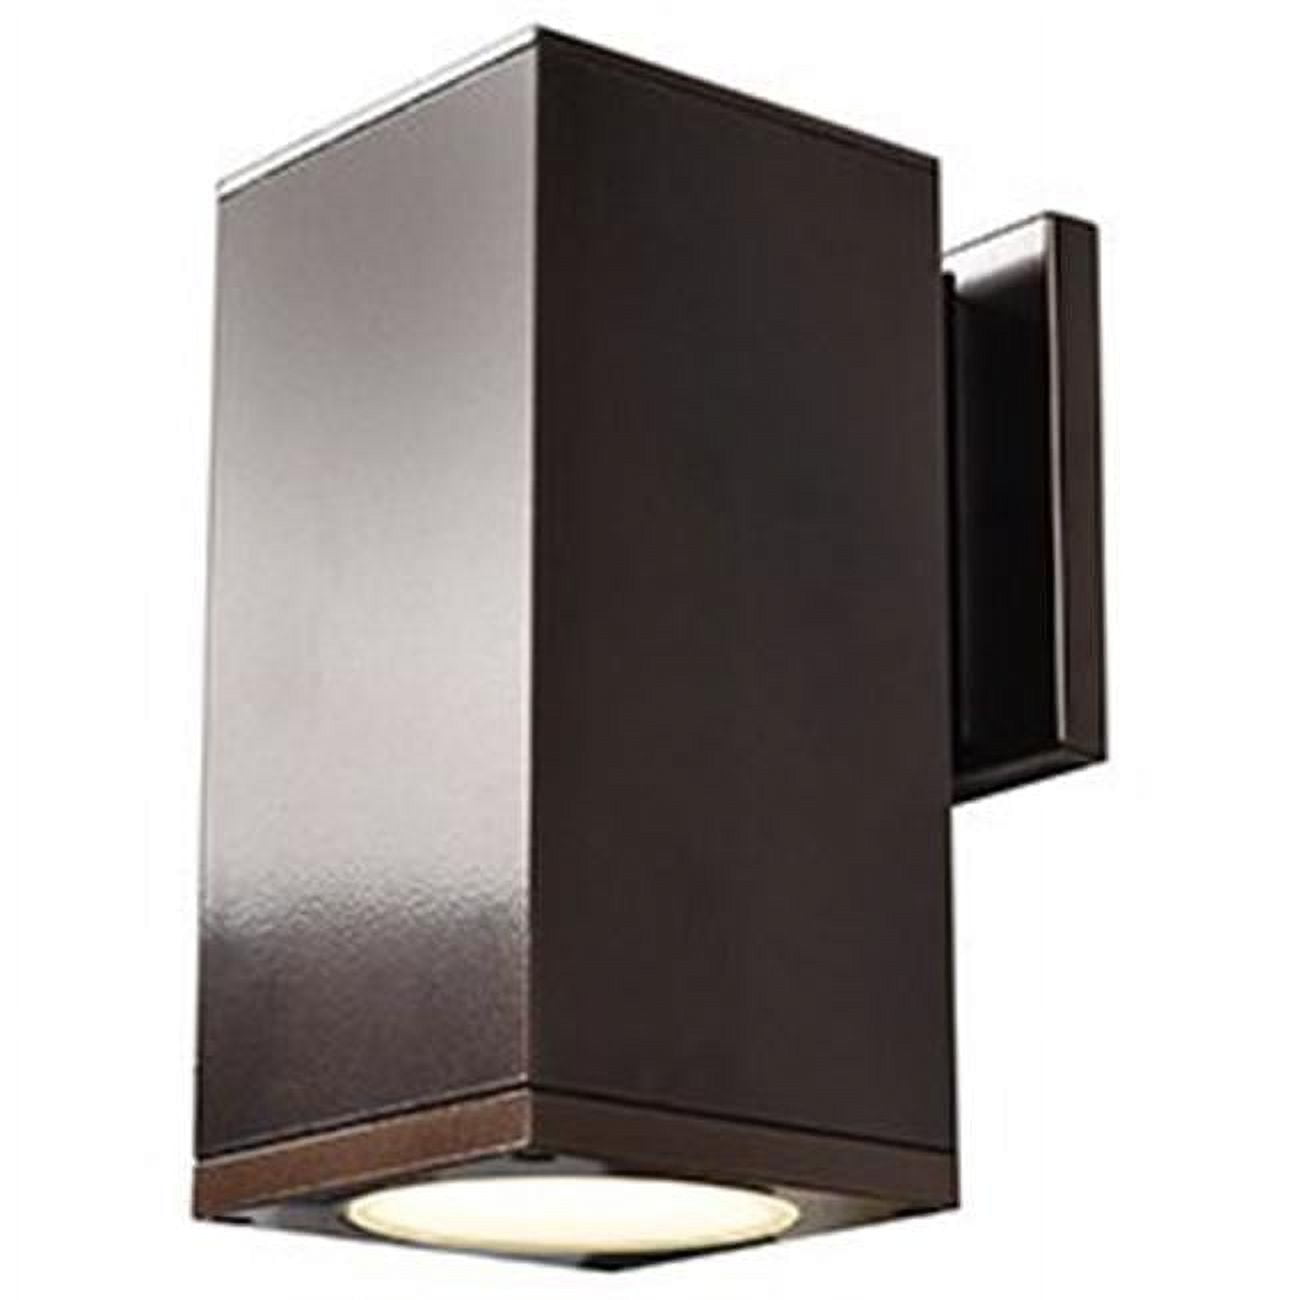 20032ledmg-brz-fst 4.5 X 8 X 5.5 In. Bayside Outdoor Square Cylinder Wall Fixture, Bronze